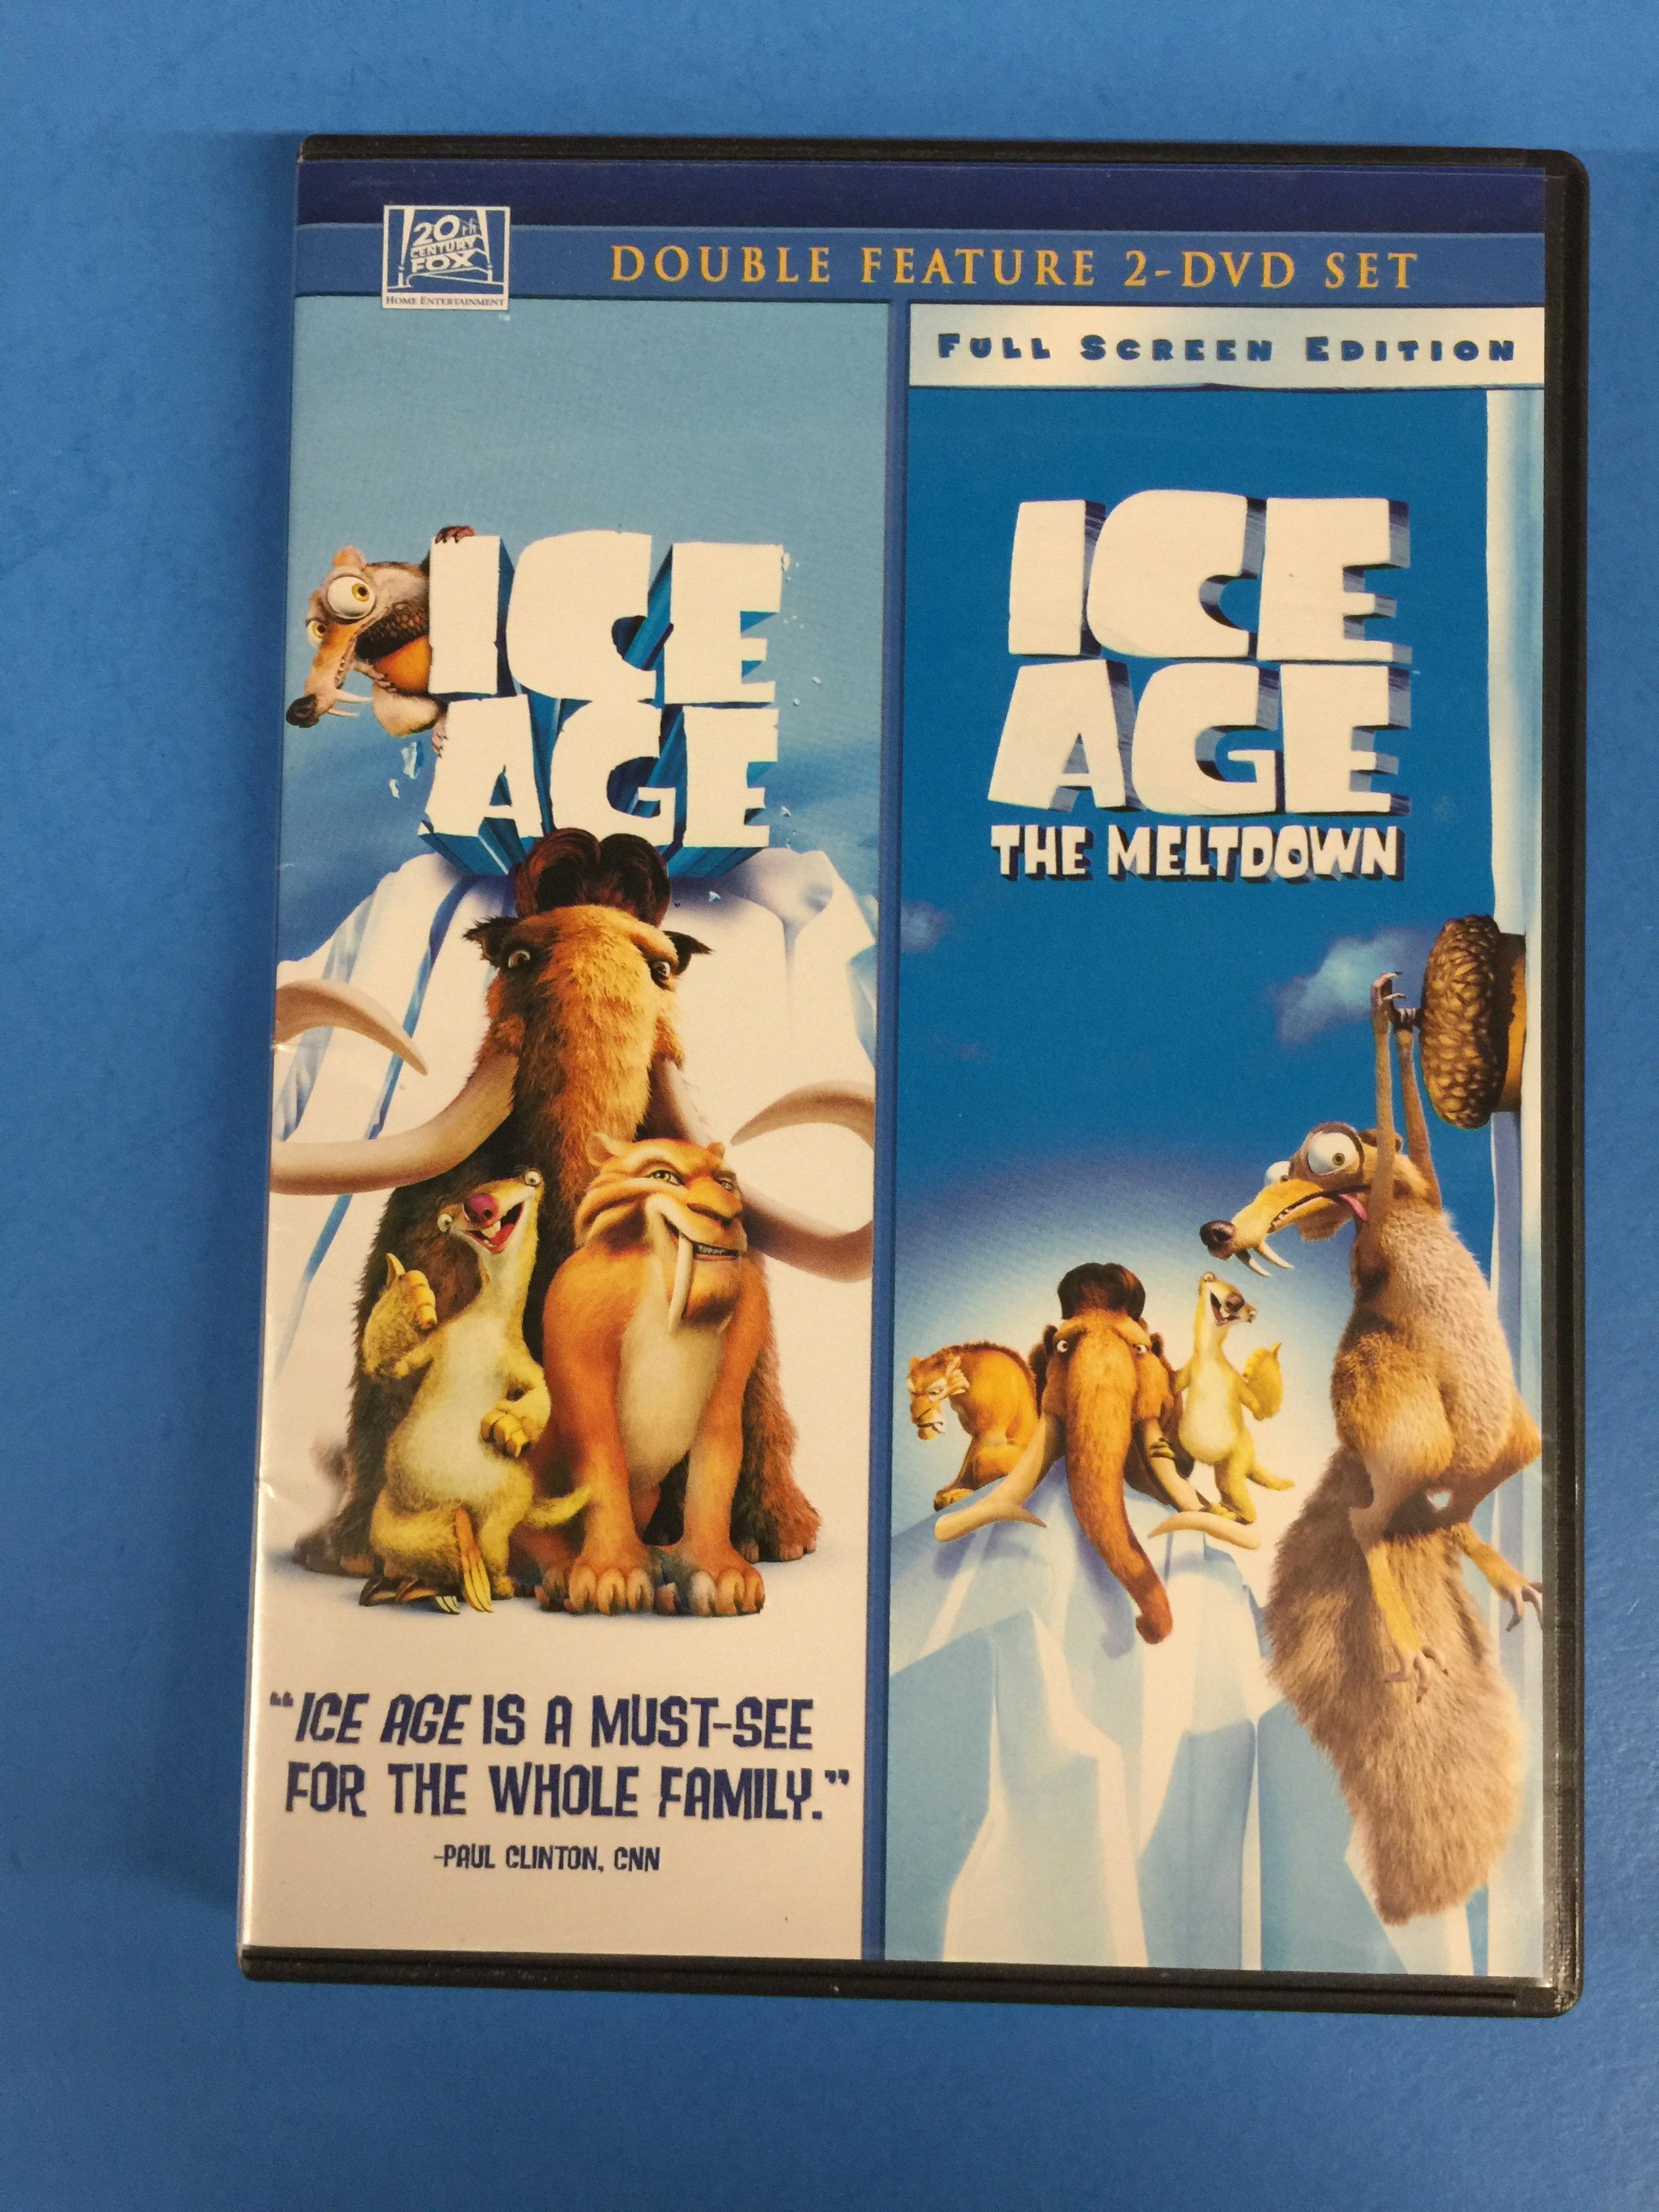 Double Feature: Ice Age & Ice Age The Meltdown DVD